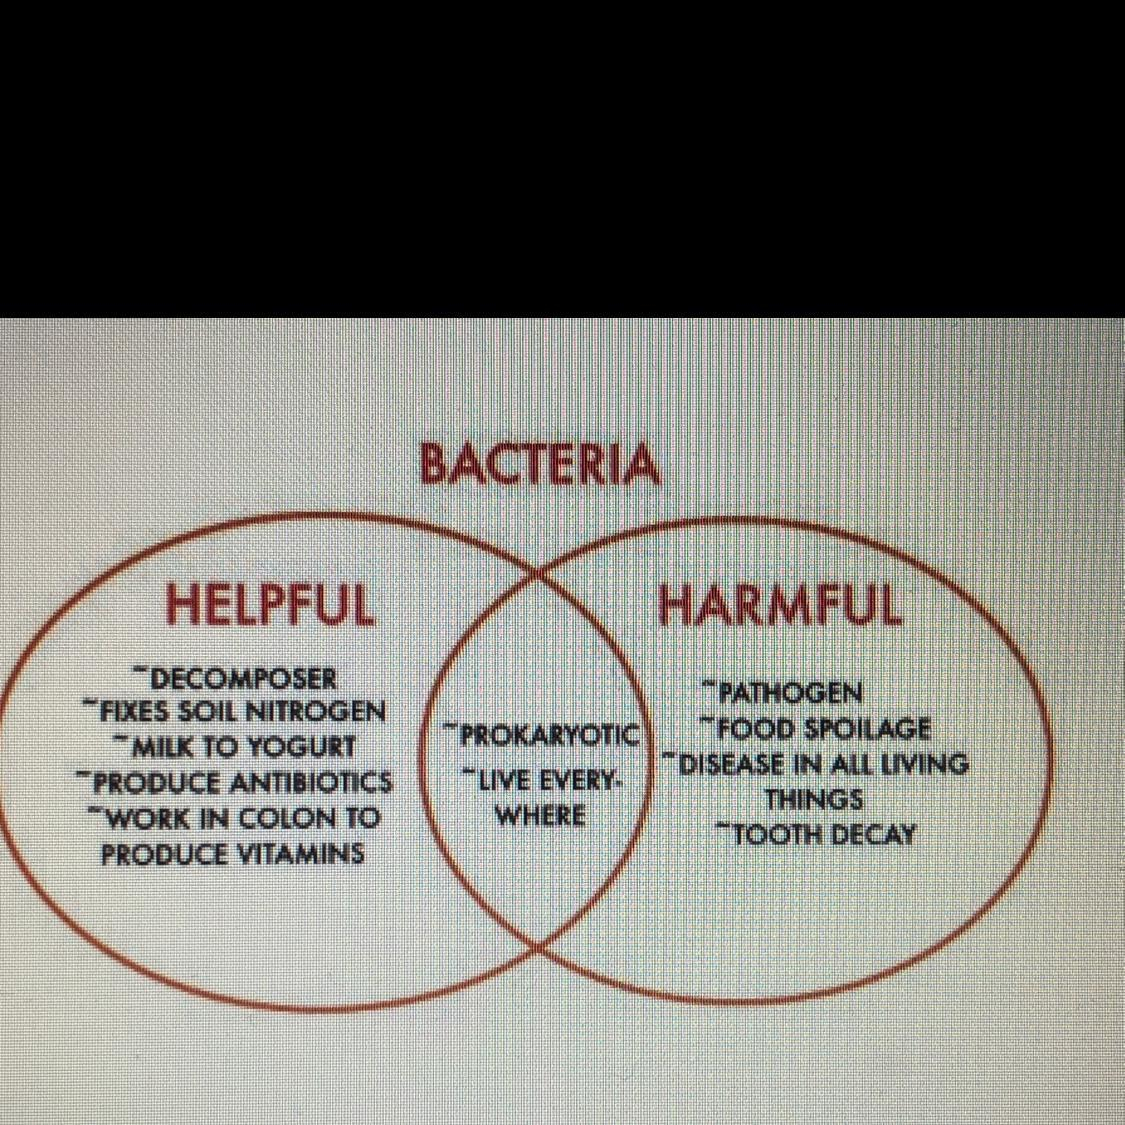 Bacteria And Virus Venn Diagram The Venn Diagram Details Some Of The Helpful And Harmful Effects Of